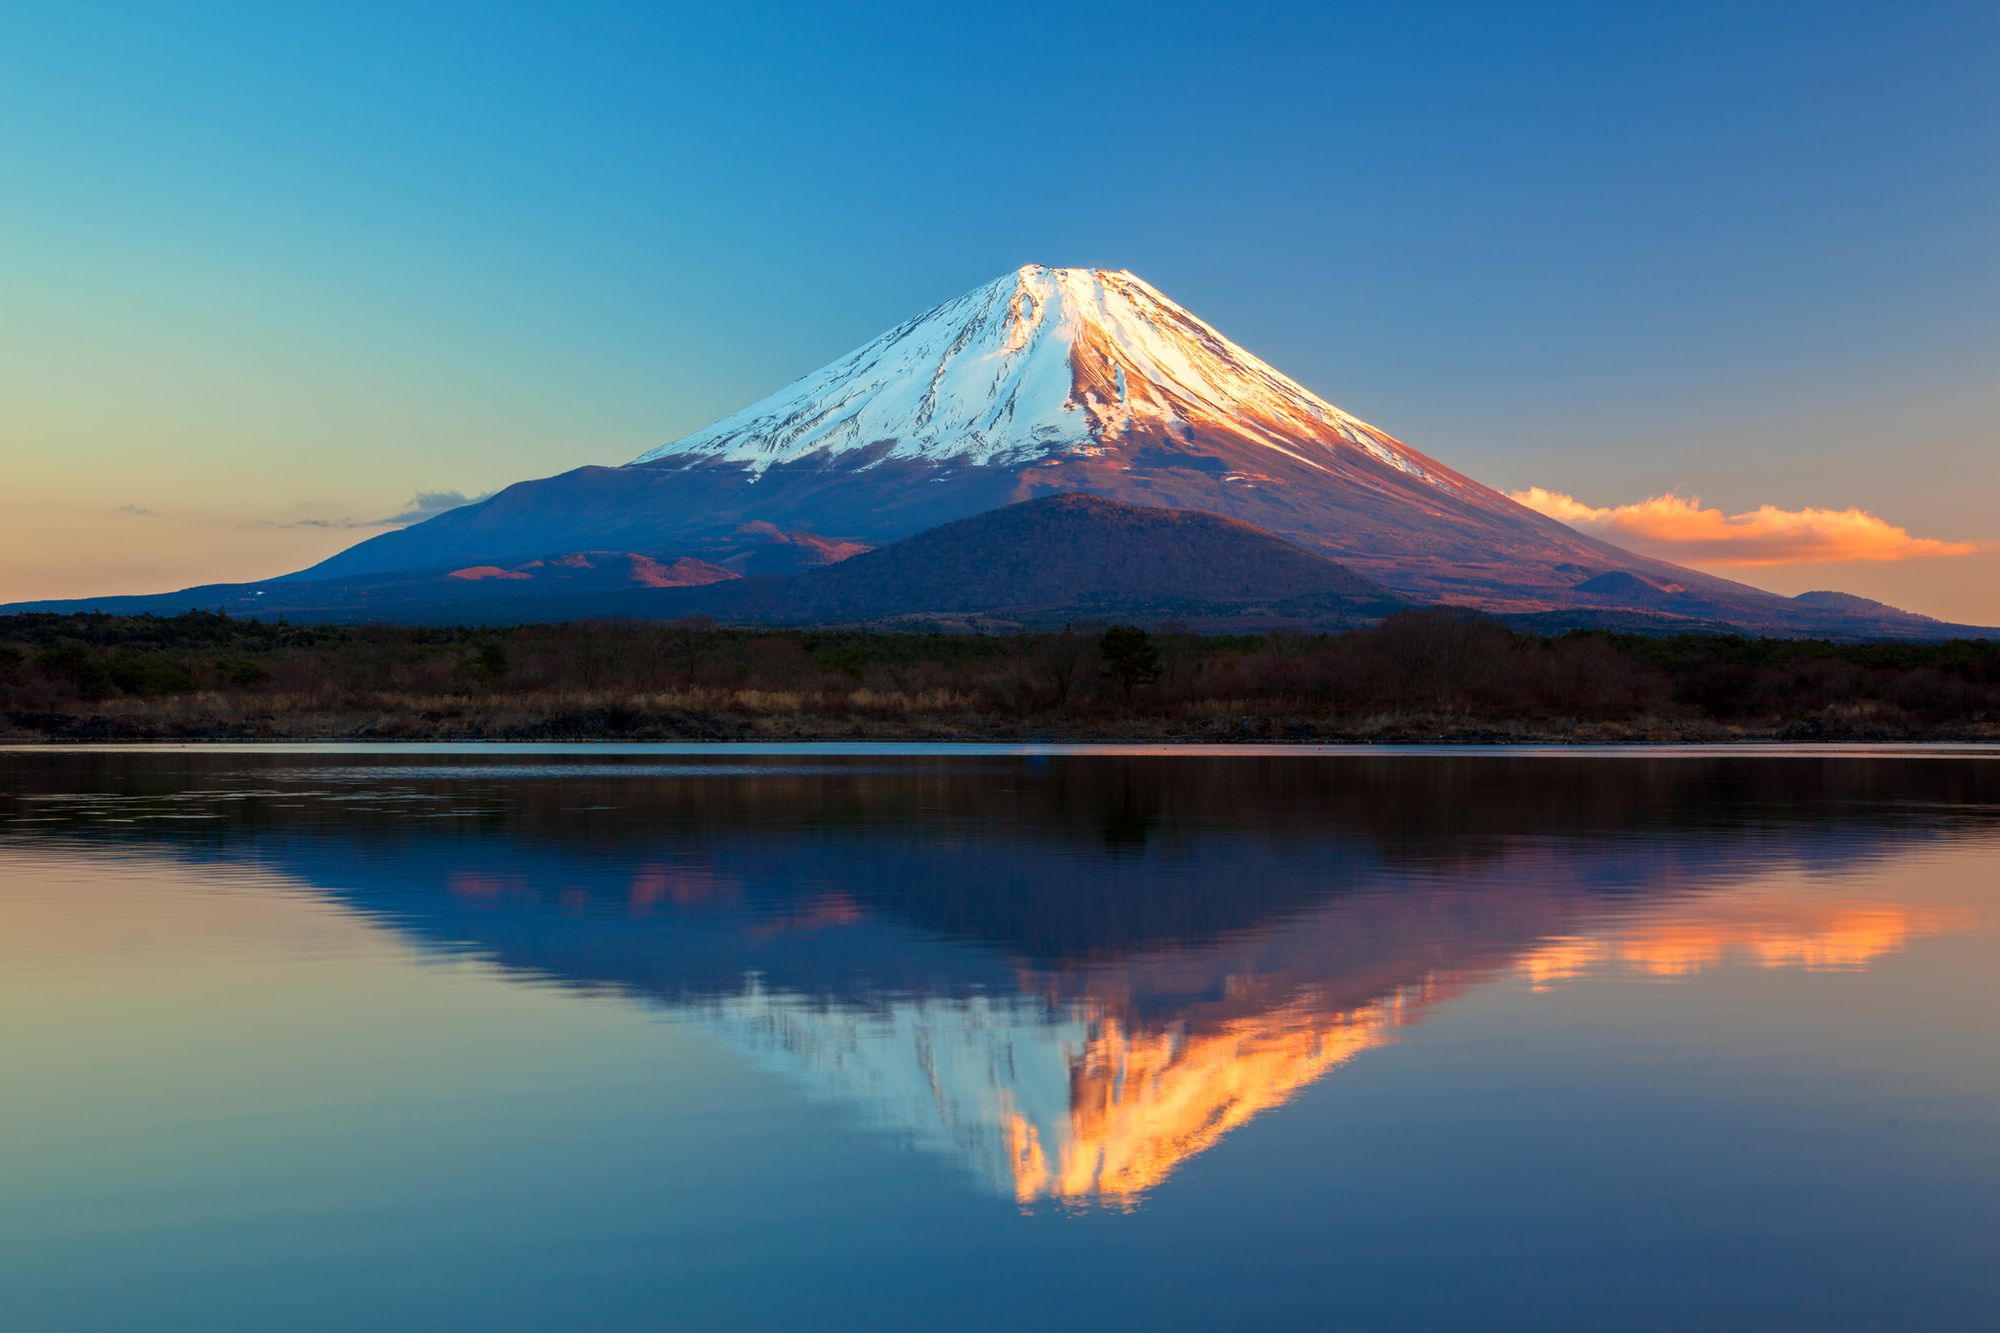 The UNESCO-listed Mount Fuji, with Lake Shoji in the foreground.